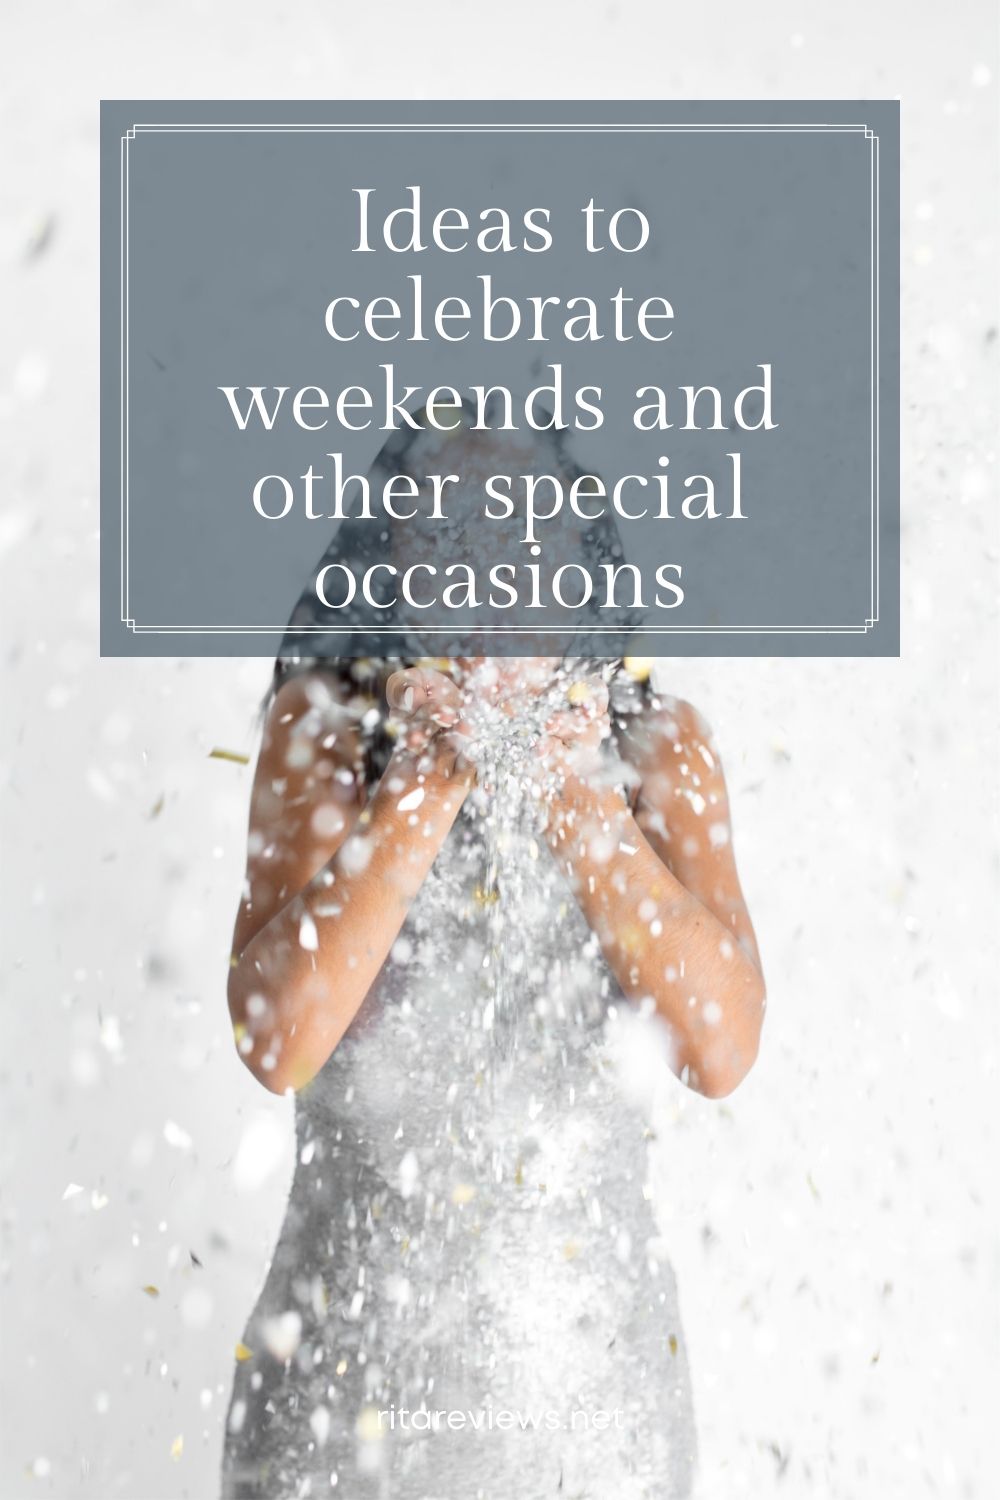 Ideas to celebrate weekends and other special occasions